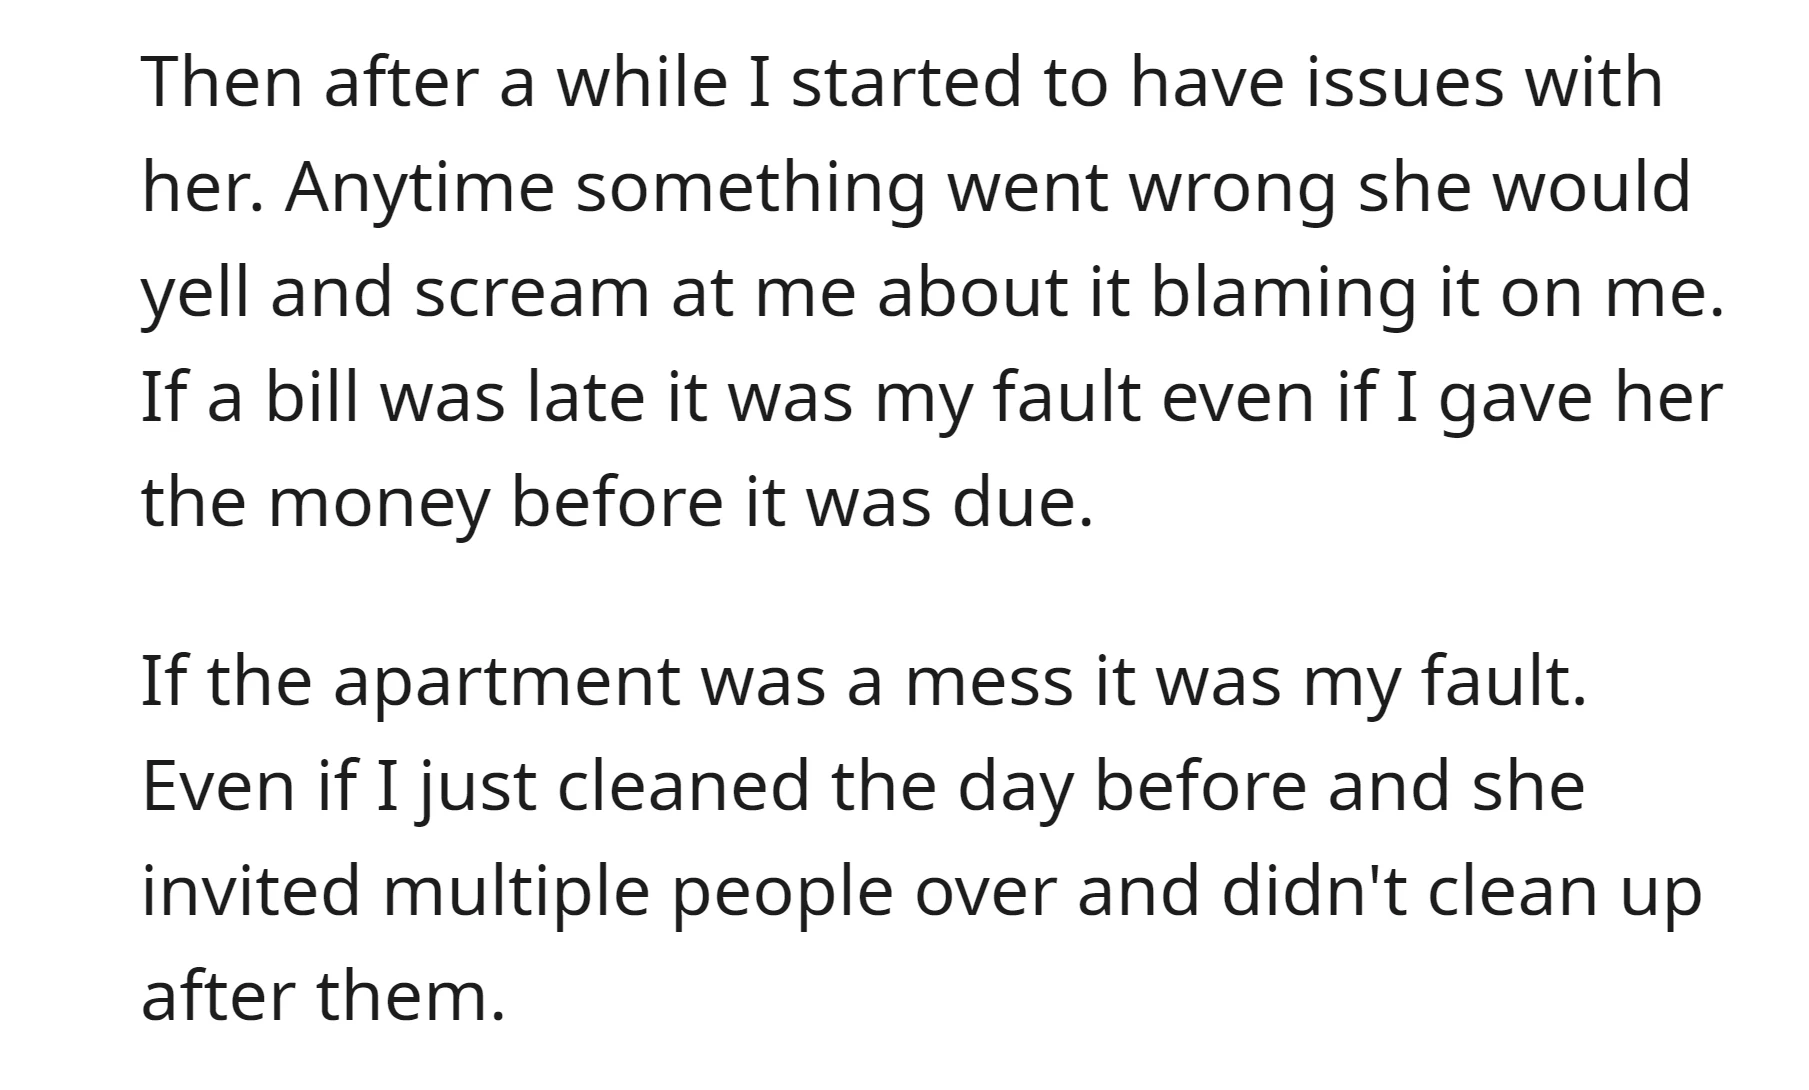 OP faced constant blame and verbal outbursts from the roommate for various issues